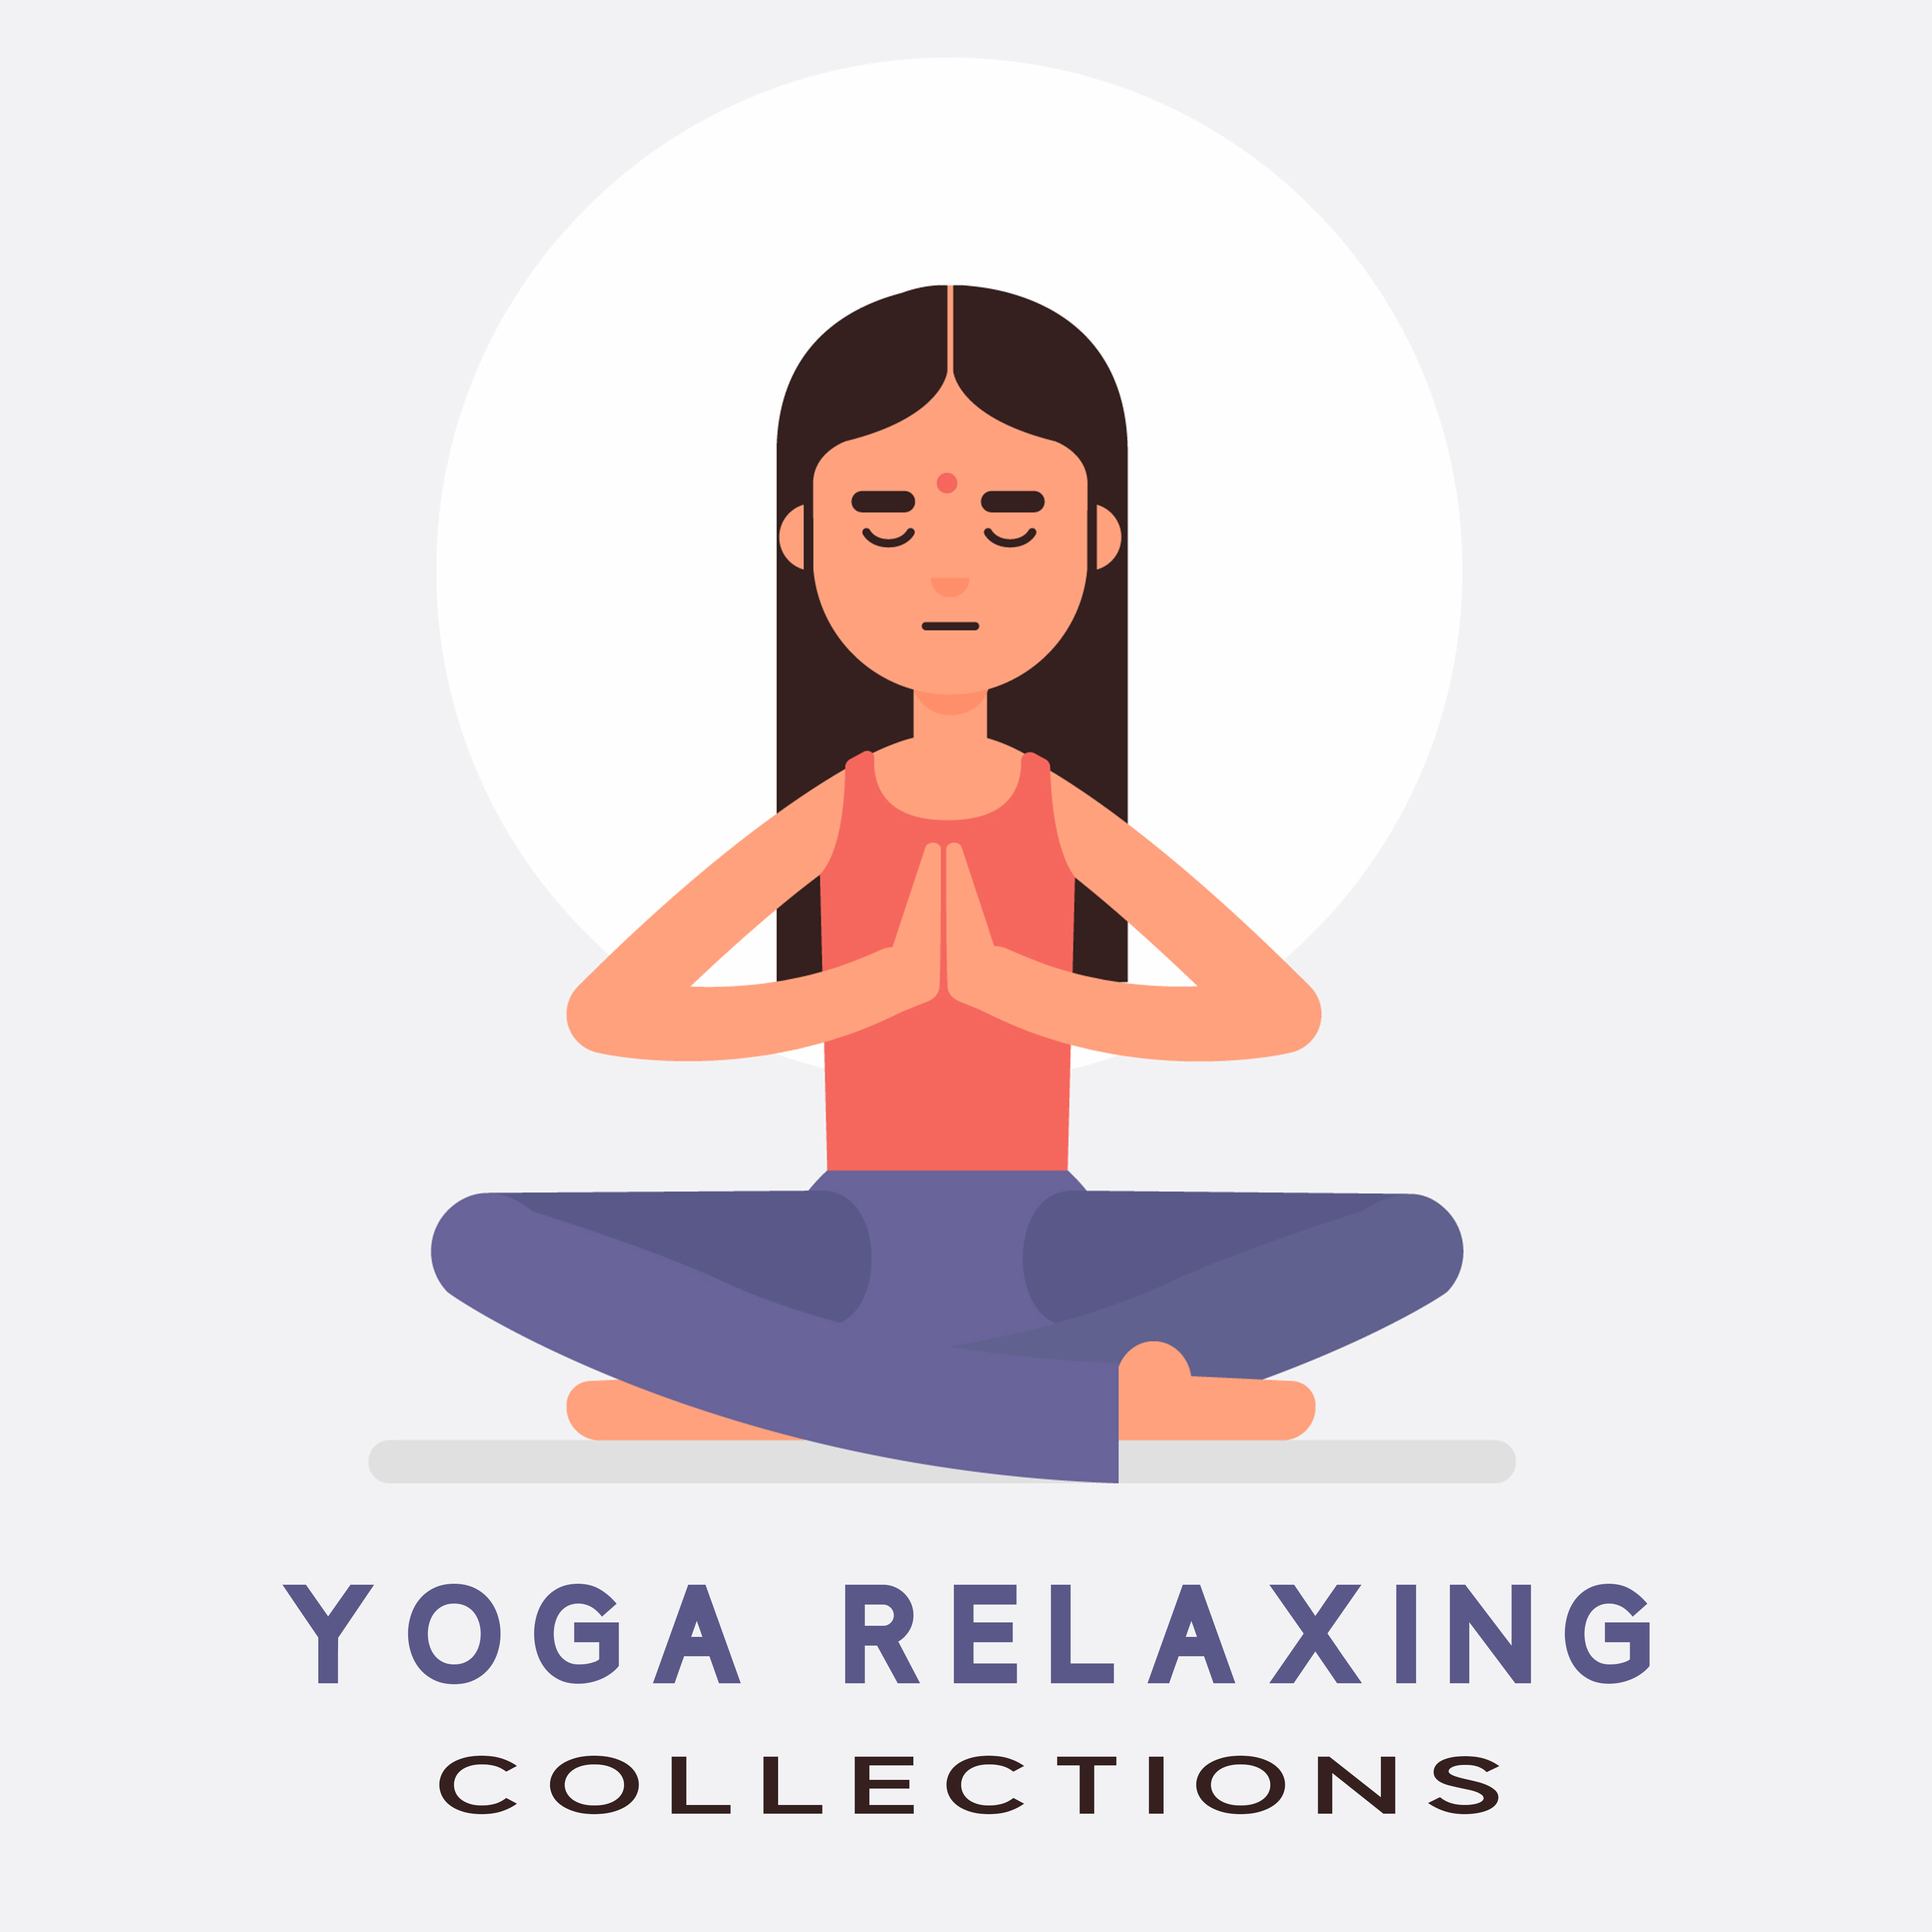 Yoga Relaxing Collections